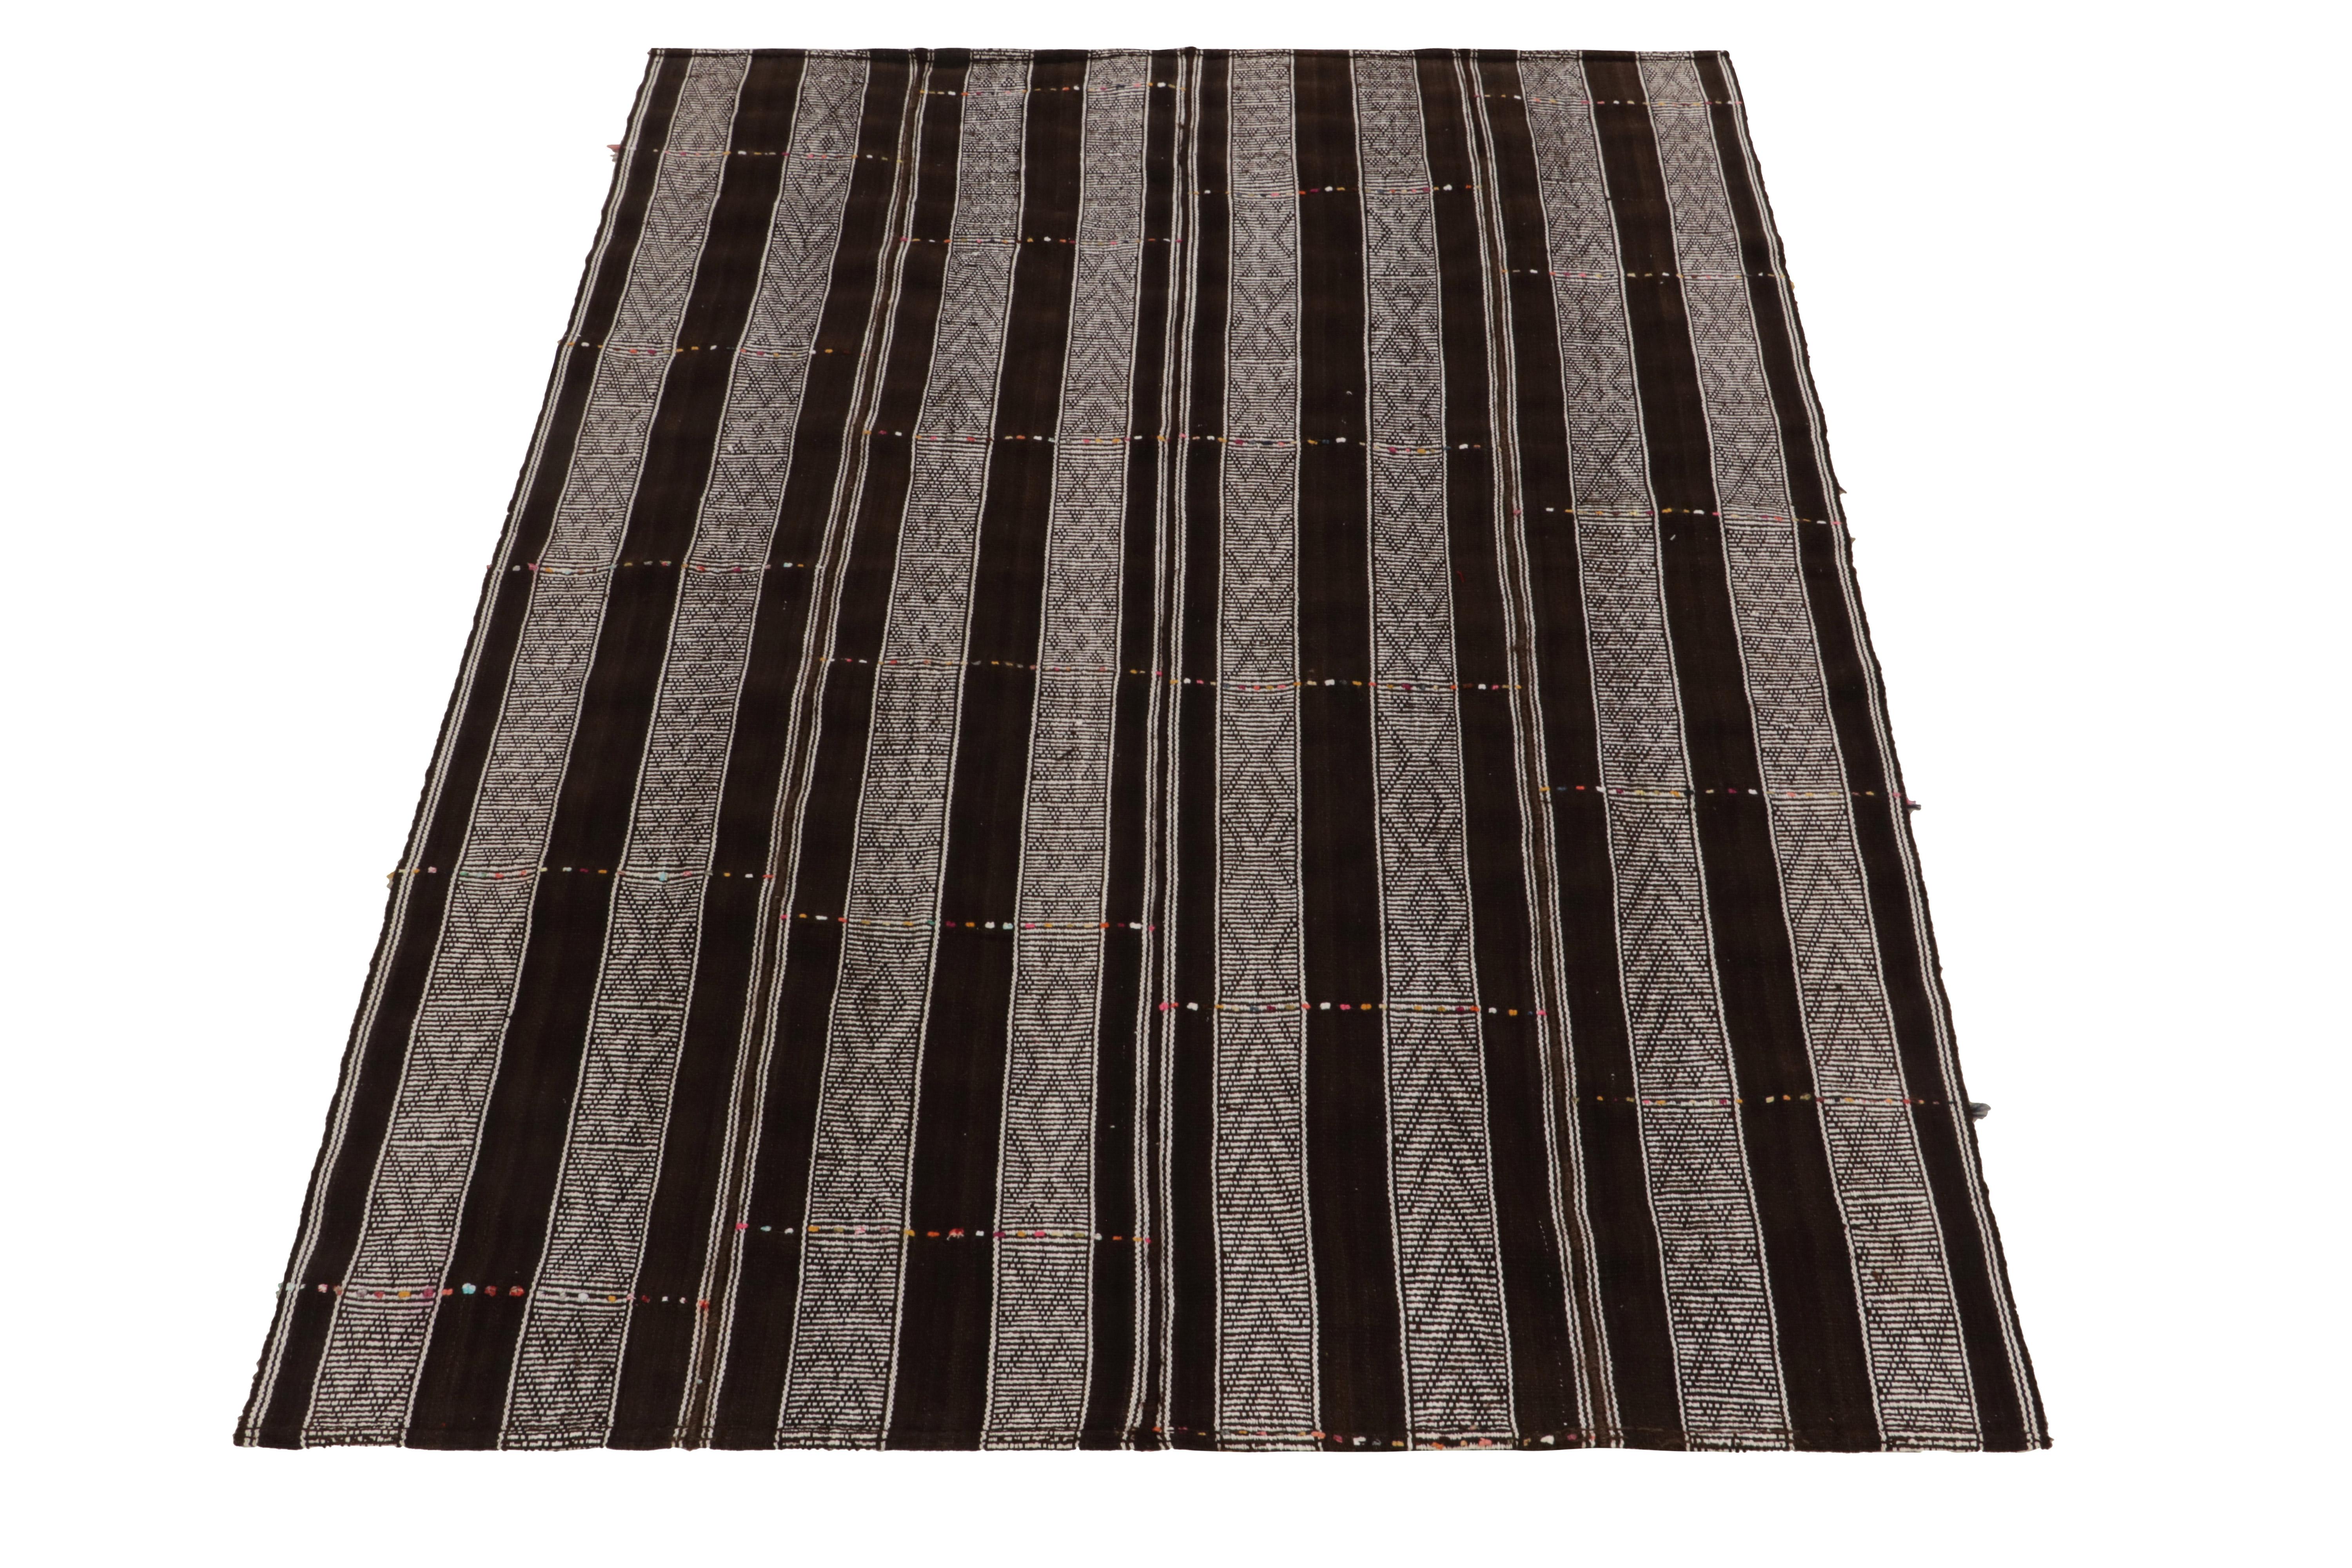 Vintage Turkish Kilim rug in all over Brown, Black & White striped pattern
Description: Handwoven in wool, a vintage Turkish kilim rug circa 1950-1970 exhibiting textura stripes in brown-black and white with exemplary pagination in mid century